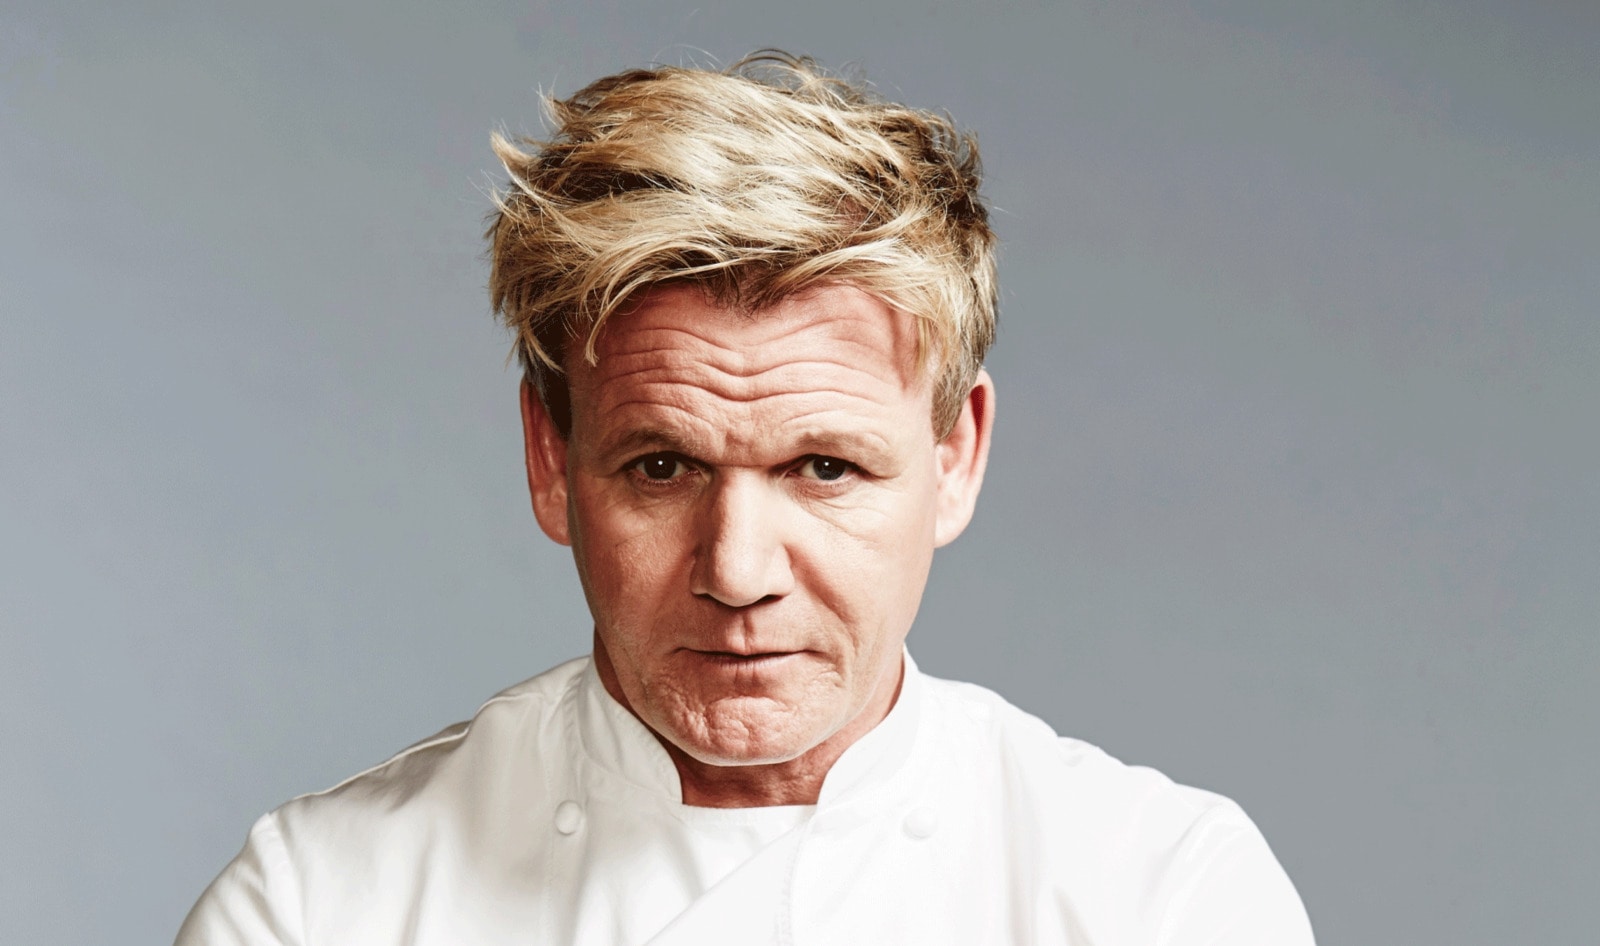 Gordon Ramsay To Add Impossible Burger to His Restaurant